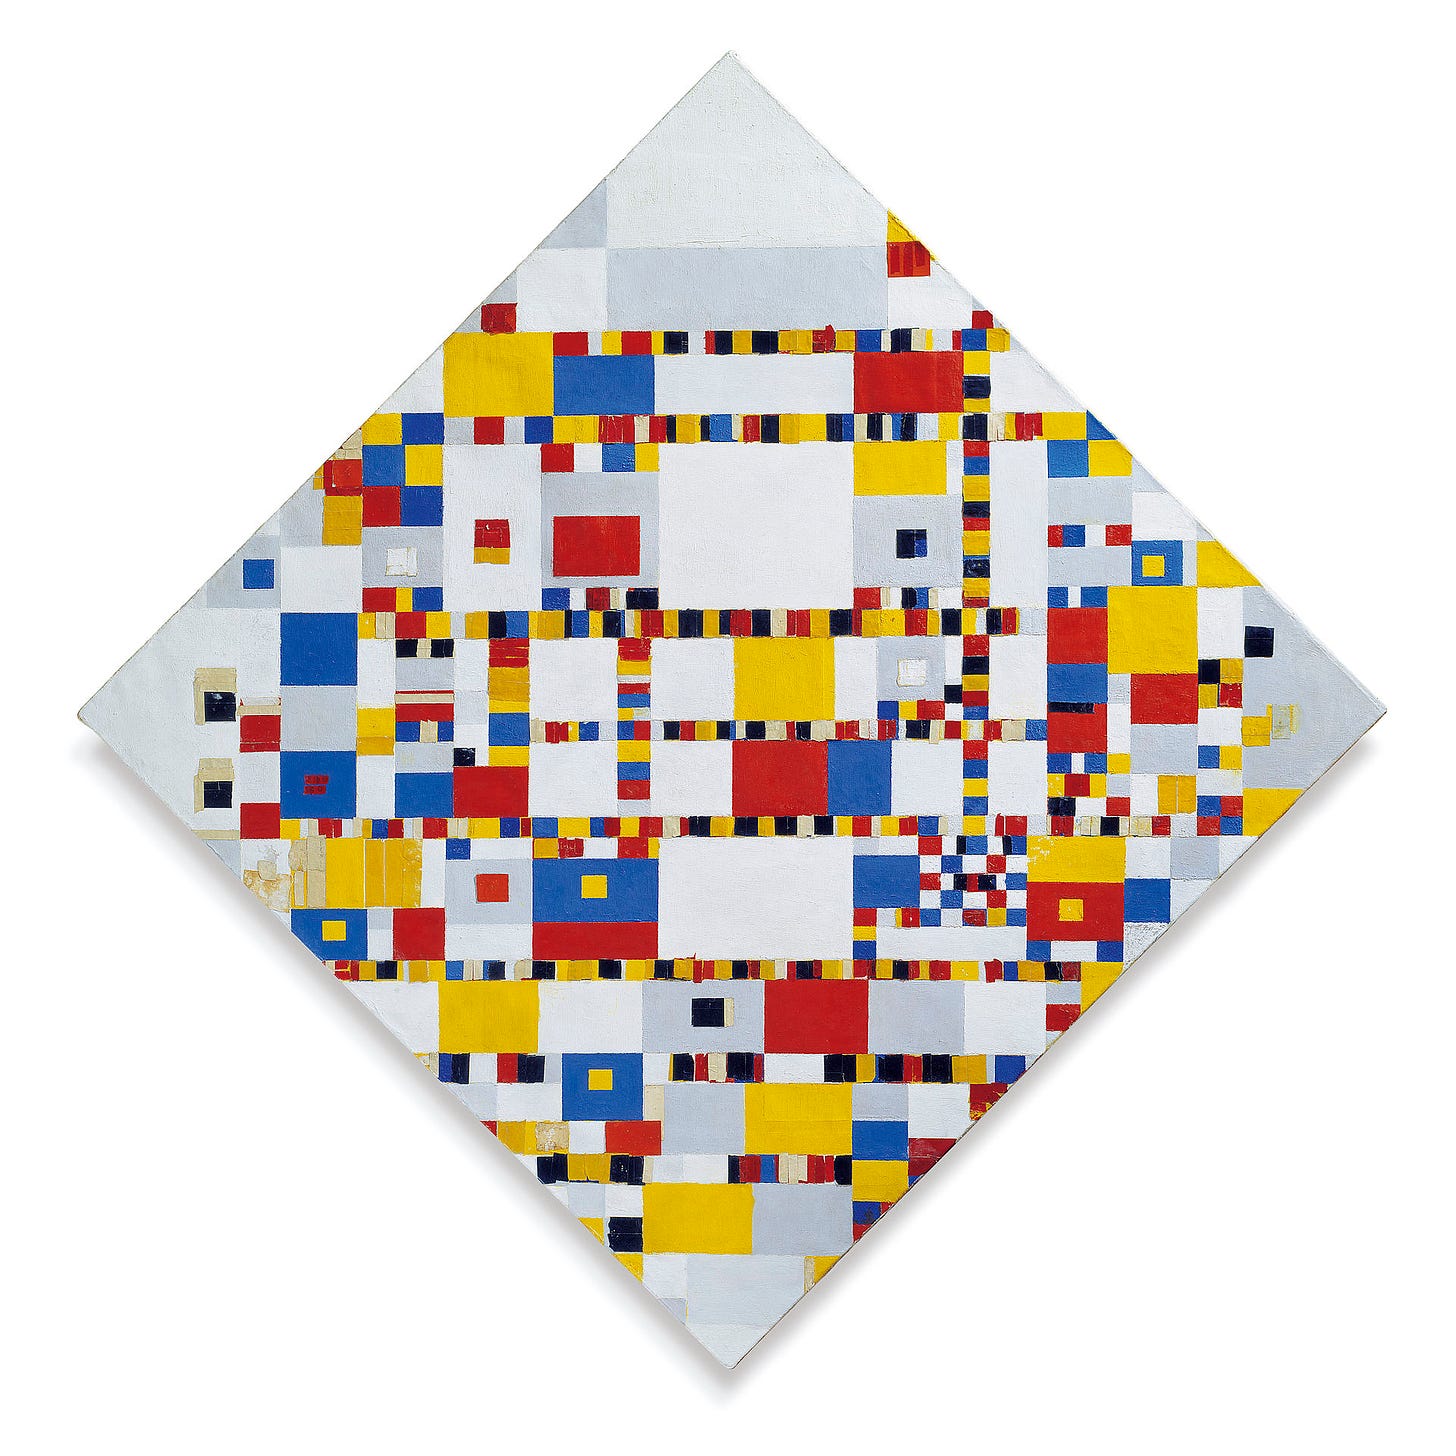 Piet Mondriaan abstract painting "Victory Boogie Woogie" from 1942–44